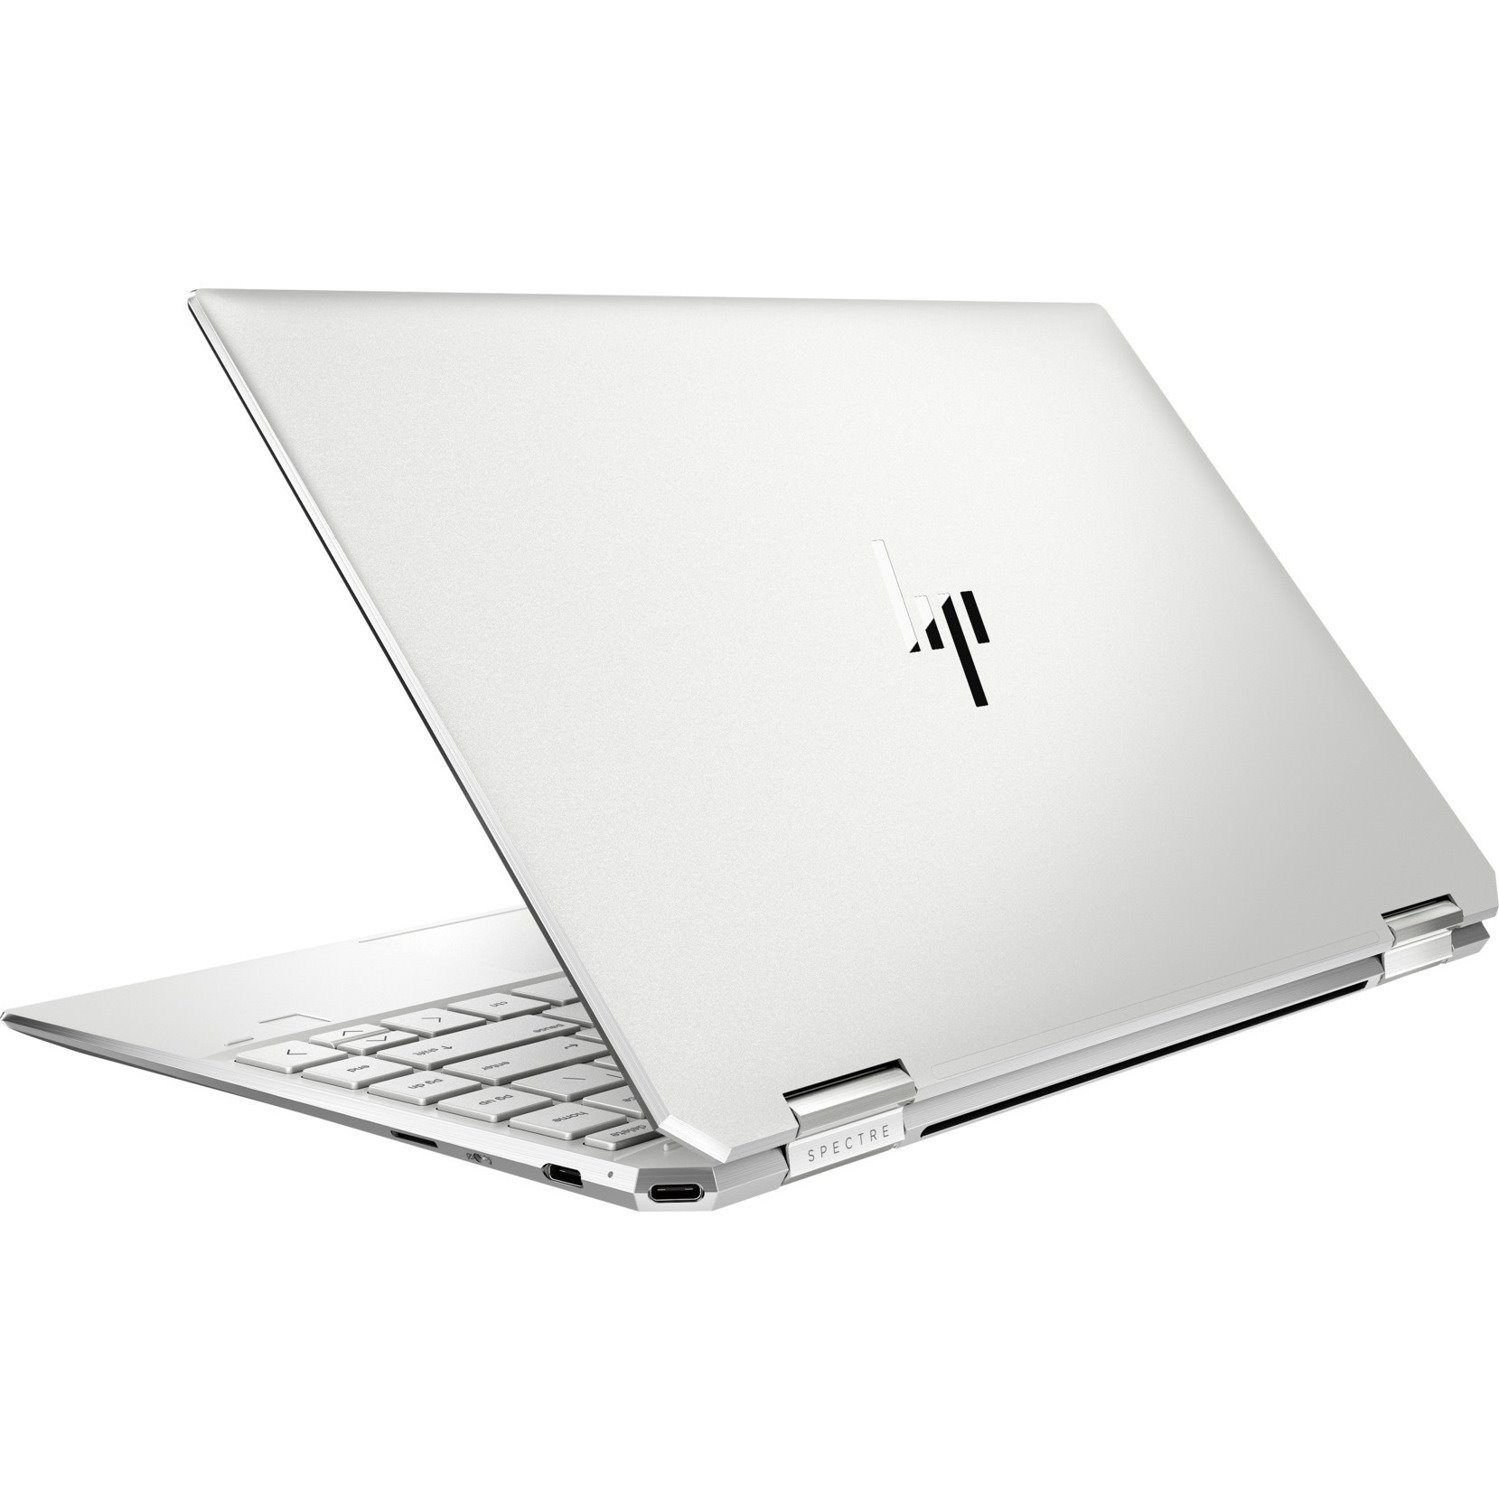 HP Spectre x360 13-aw0000 13-aw0126tu 13.3" Touchscreen Convertible 2 in 1 Notebook - 4K UHD - 3840 x 2160 - Intel Core i7 10th Gen i7-1065G7 Quad-core (4 Core) 1.30 GHz - 16 GB Total RAM - 1 TB SSD - Natural Silver